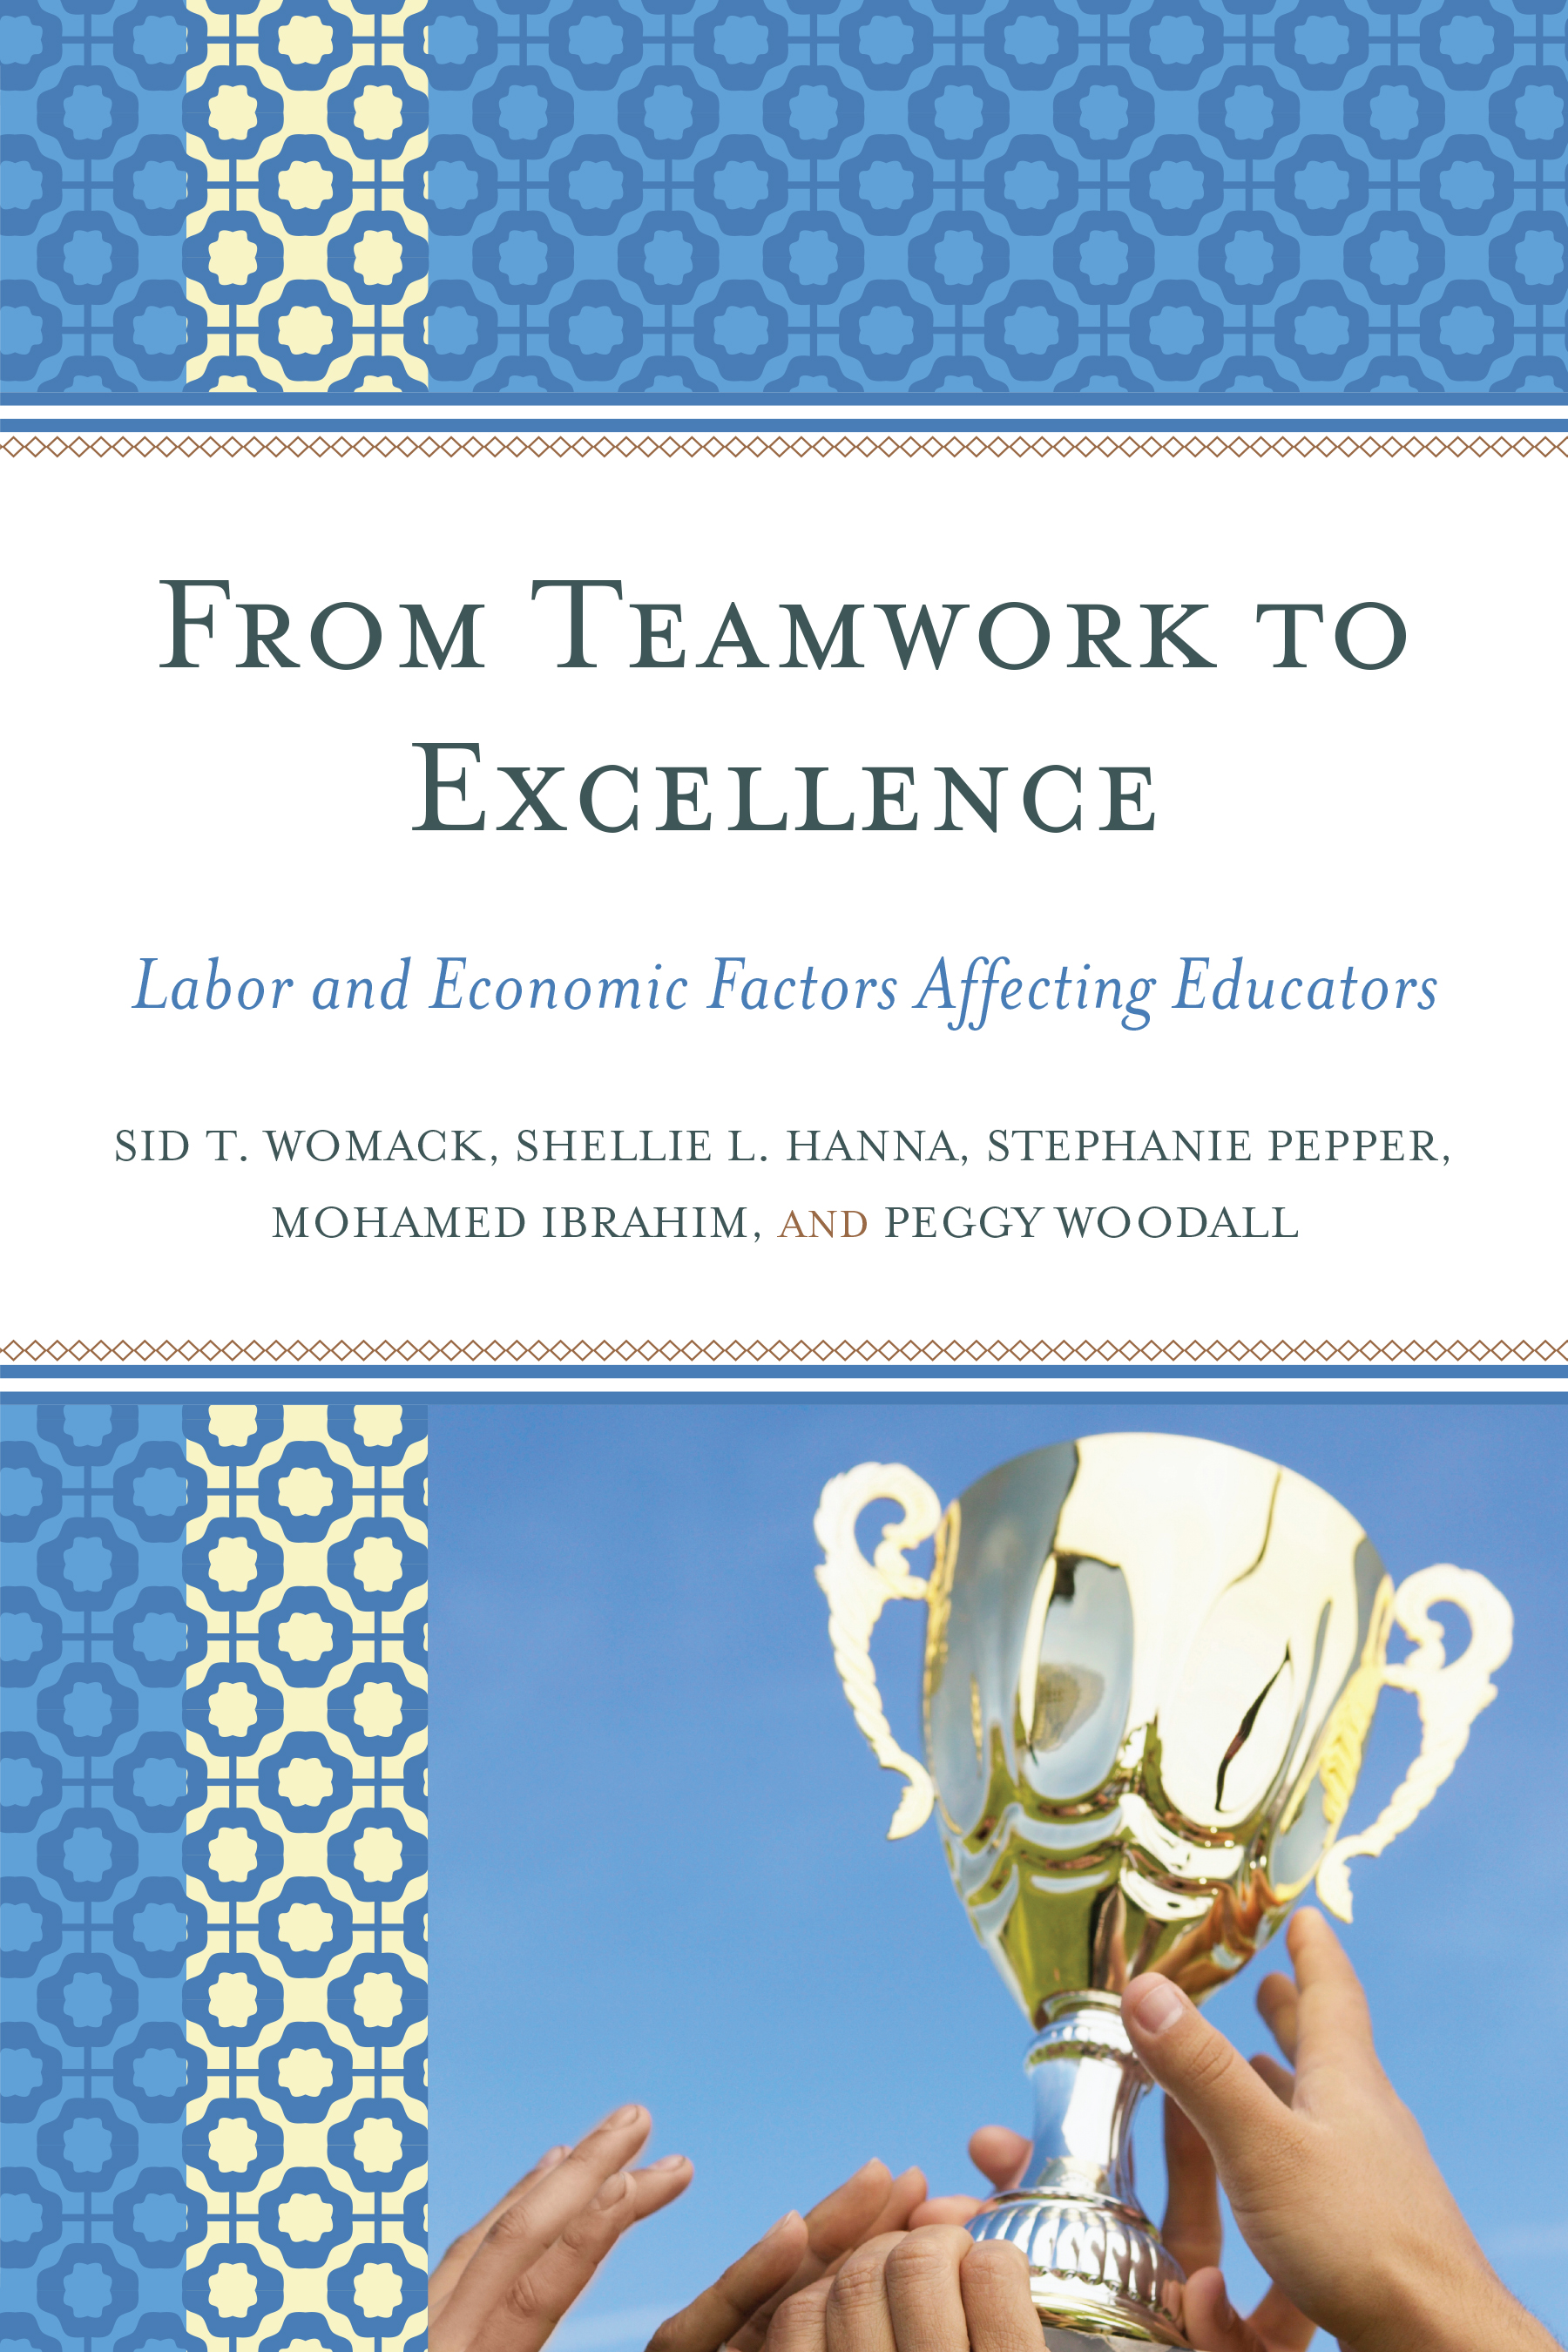 From Teamwork to Excellence: Labor and Economic Factors Affecting Educators